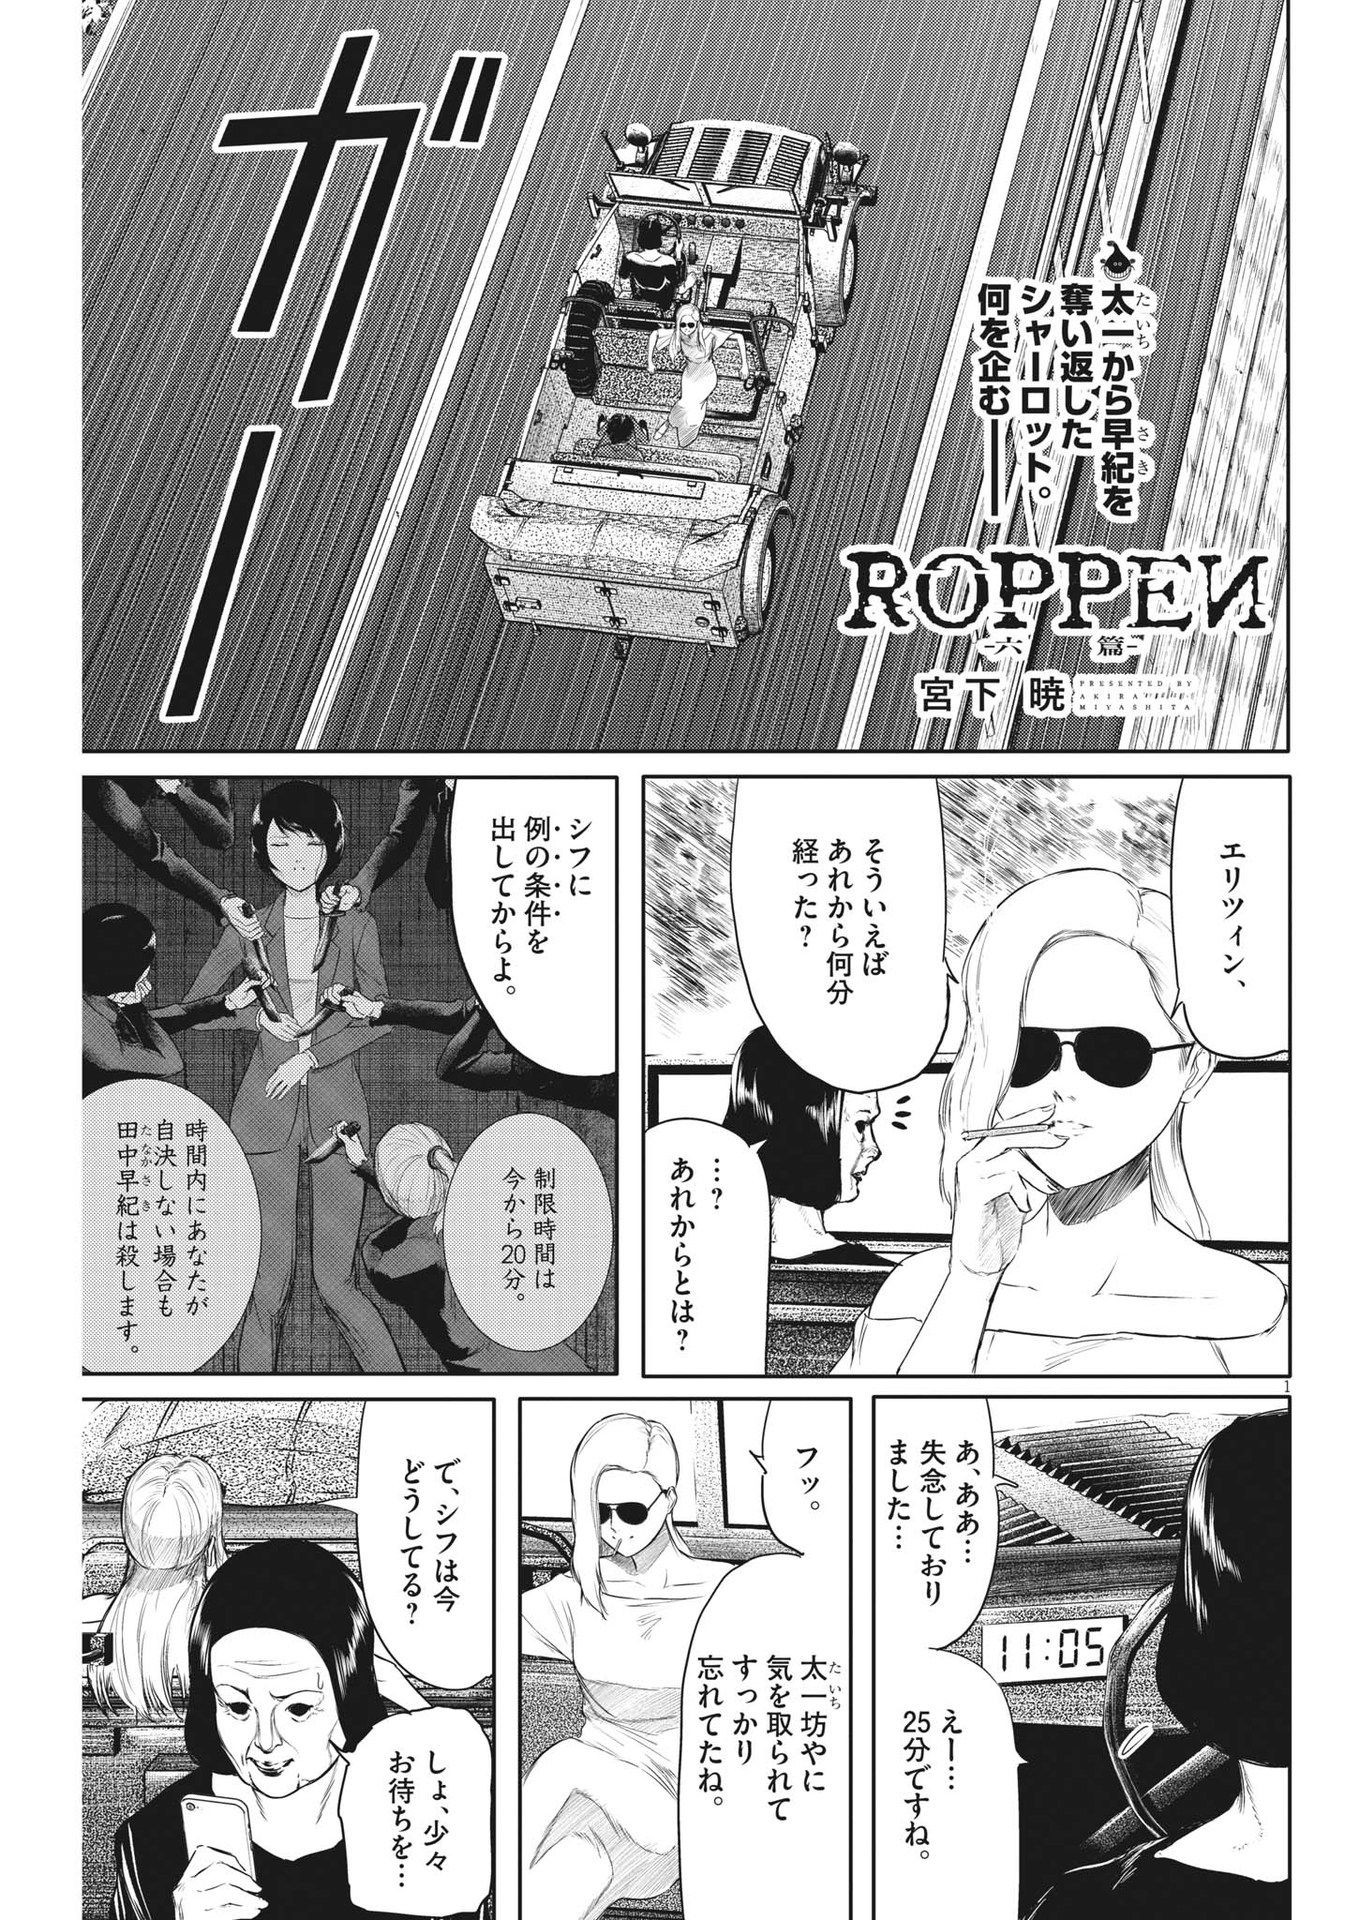 Roppen - Chapter 39 - Page 1